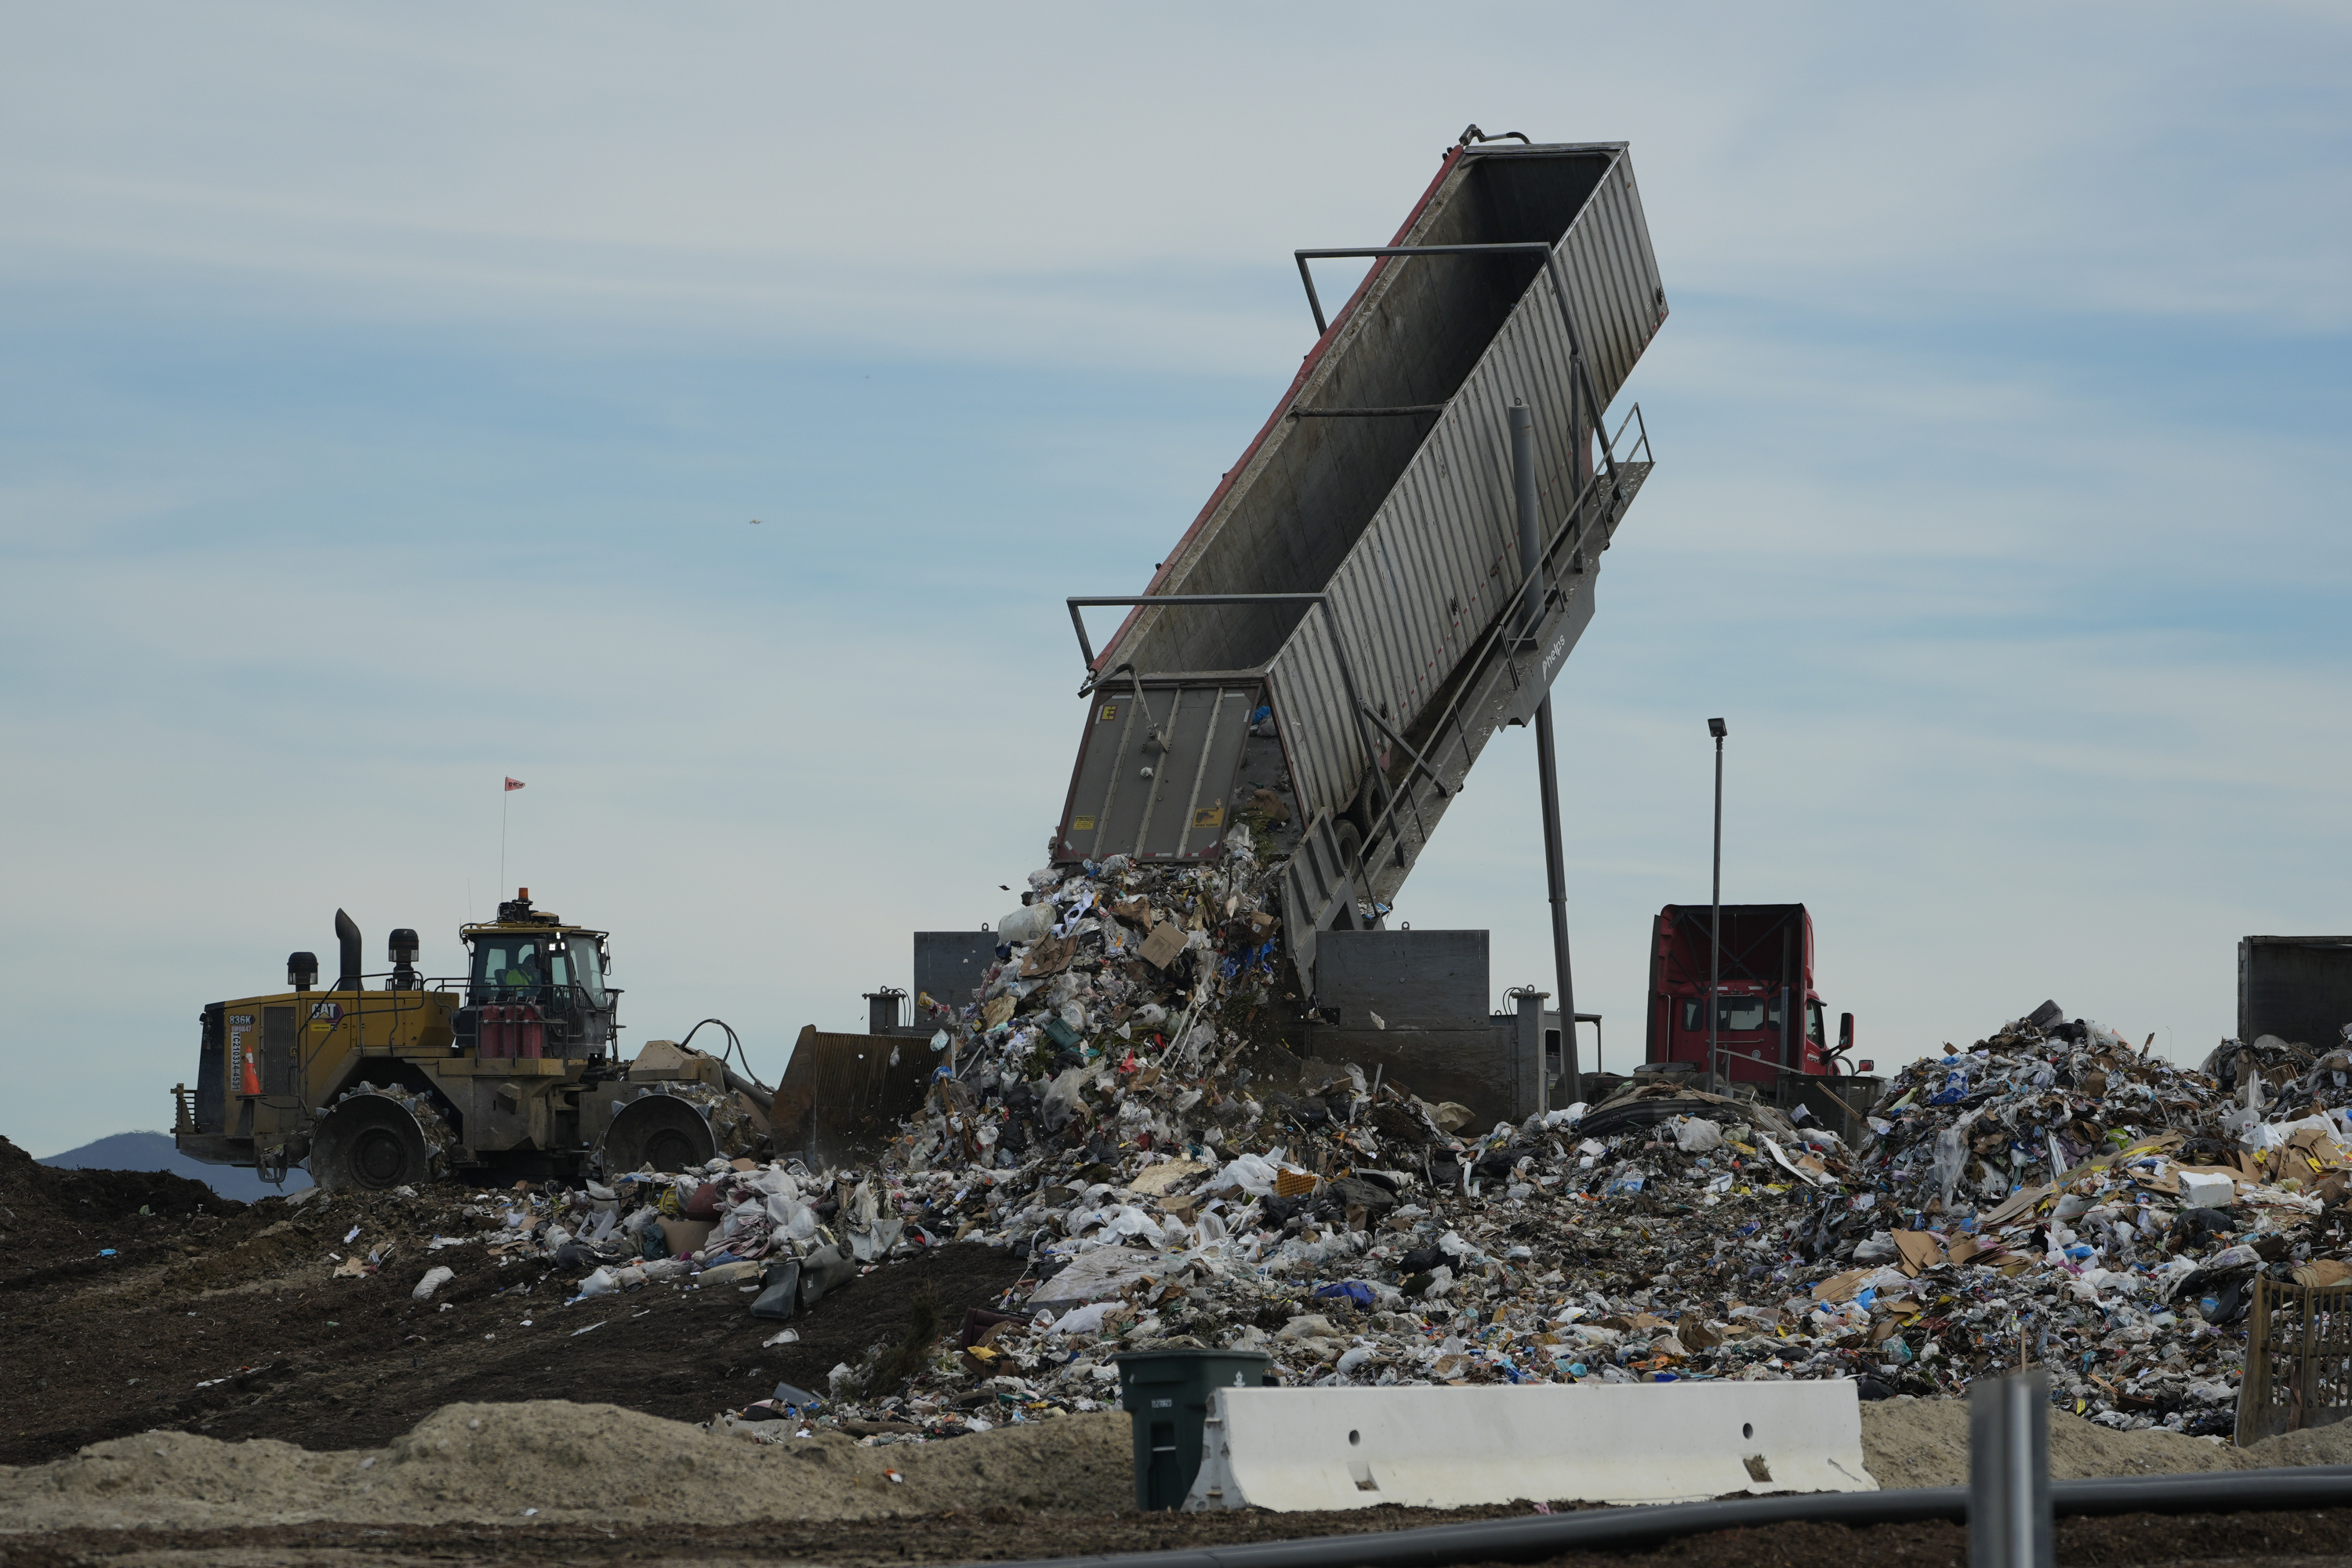 a large trash-unloading machine is seen dumping garbage at a landfill by day